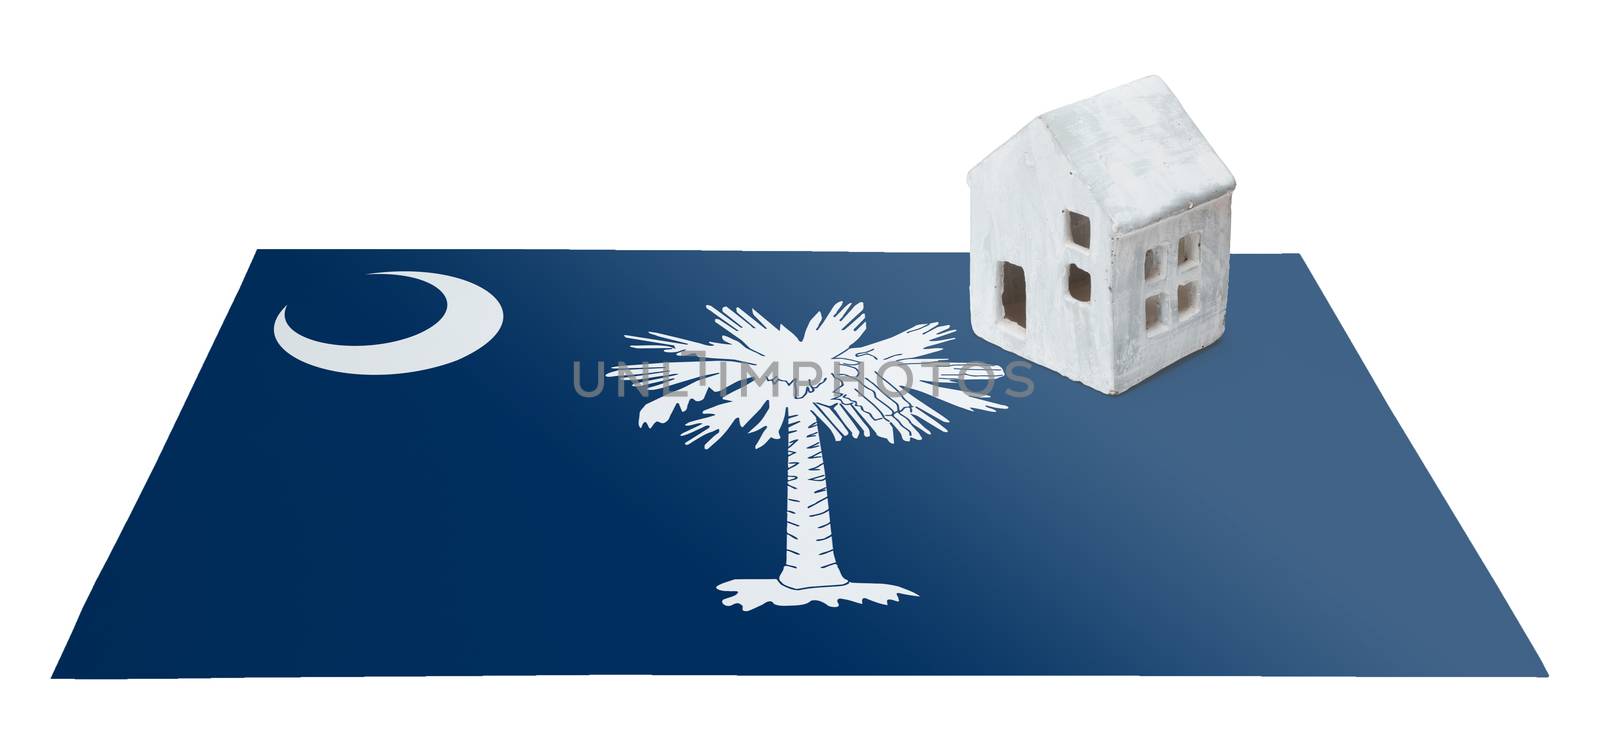 Small house on a flag - South Carolina by michaklootwijk